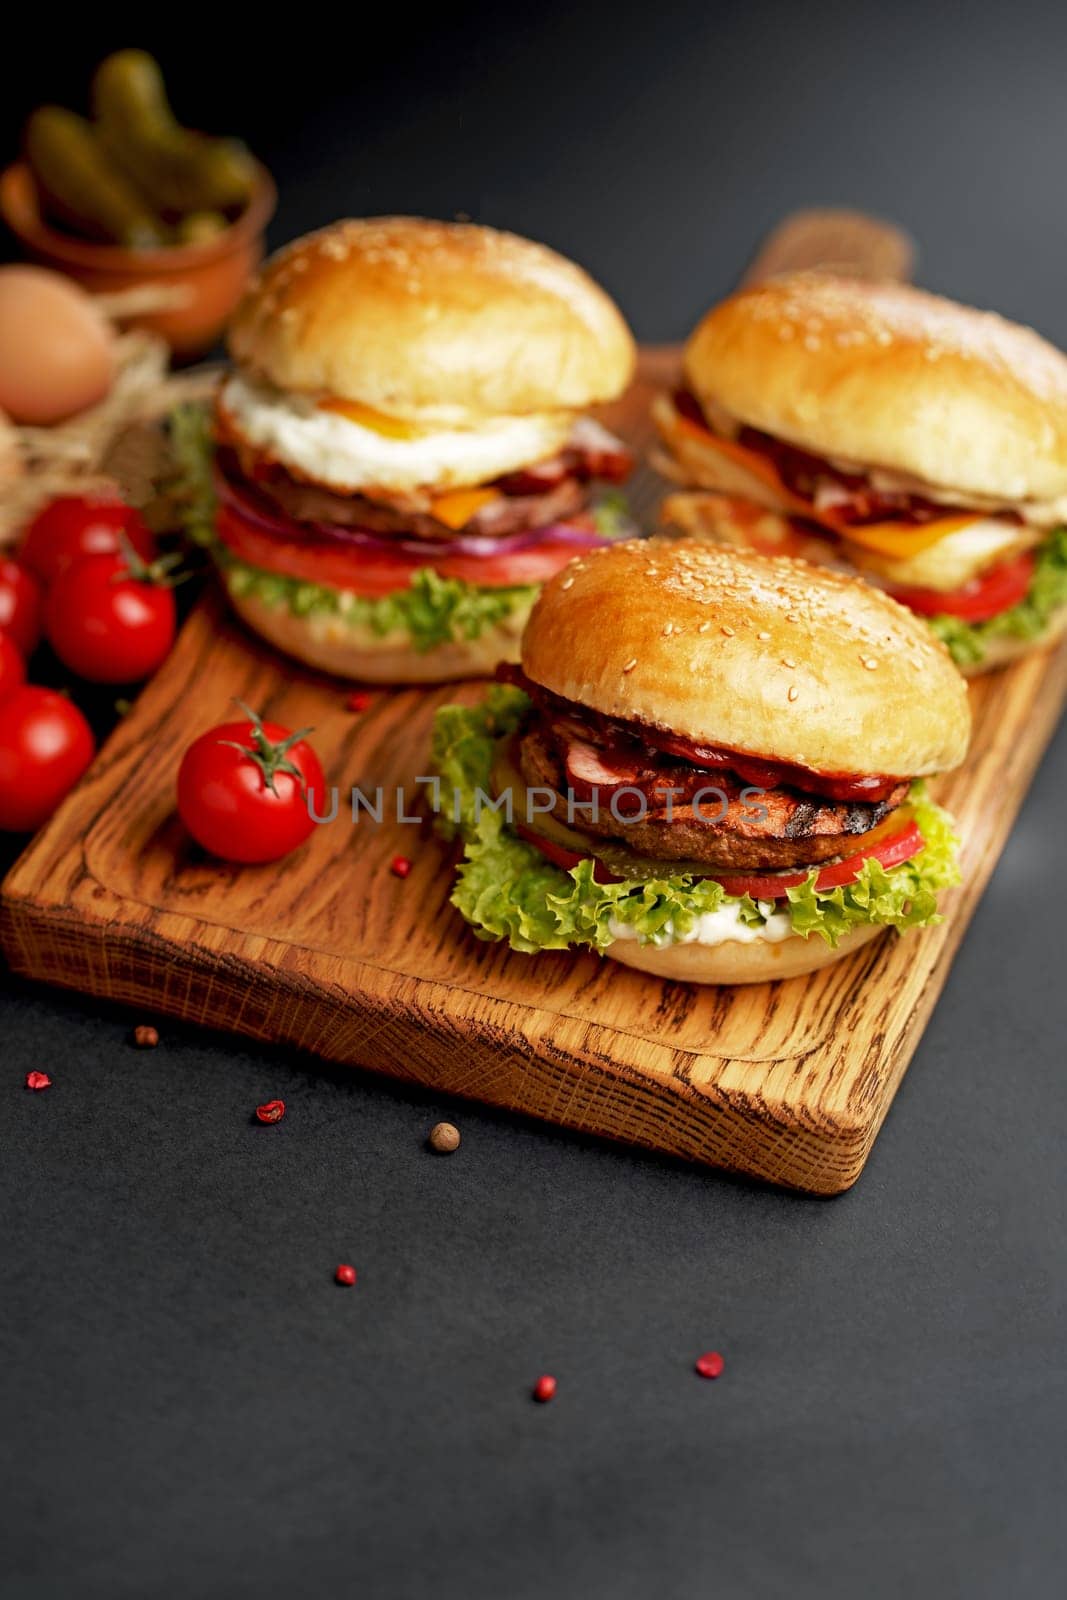 Homemade tasty double burger with beef, salad, bacon, tomatoes and cheese on wooden background. Rustic style.